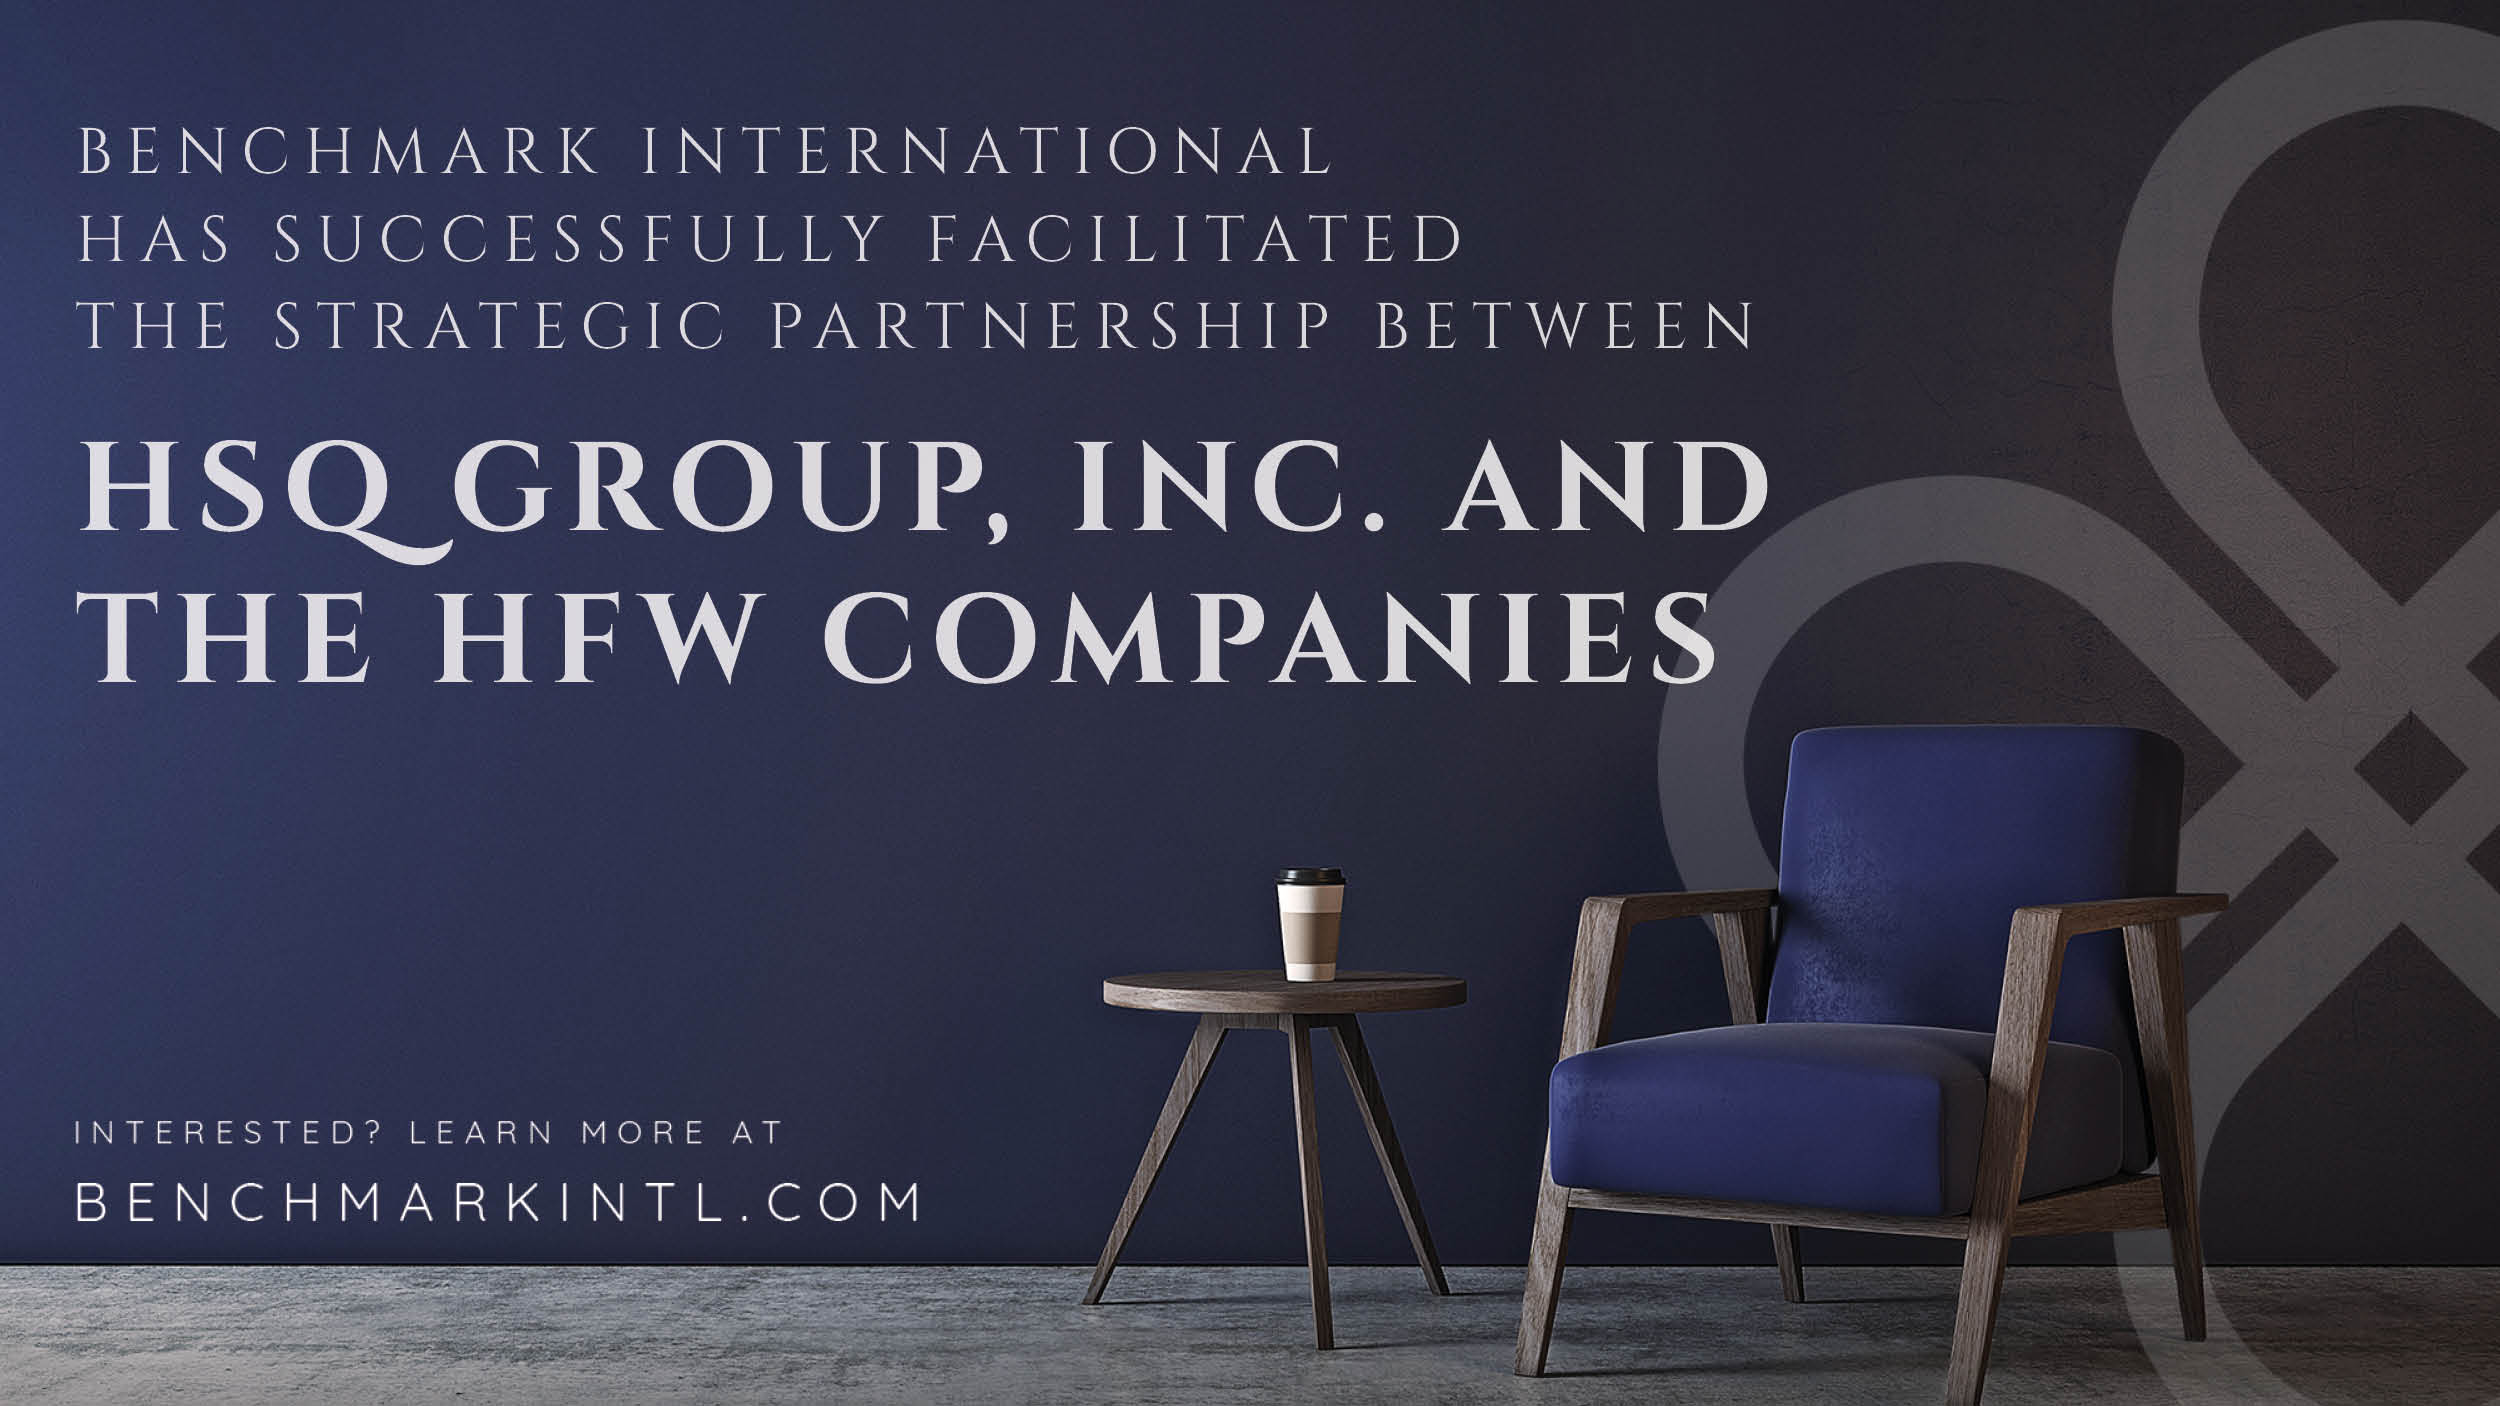 Benchmark International Successfully Facilitated the Strategic Partnership Between HSQ Group, Inc. and The HFW Companies